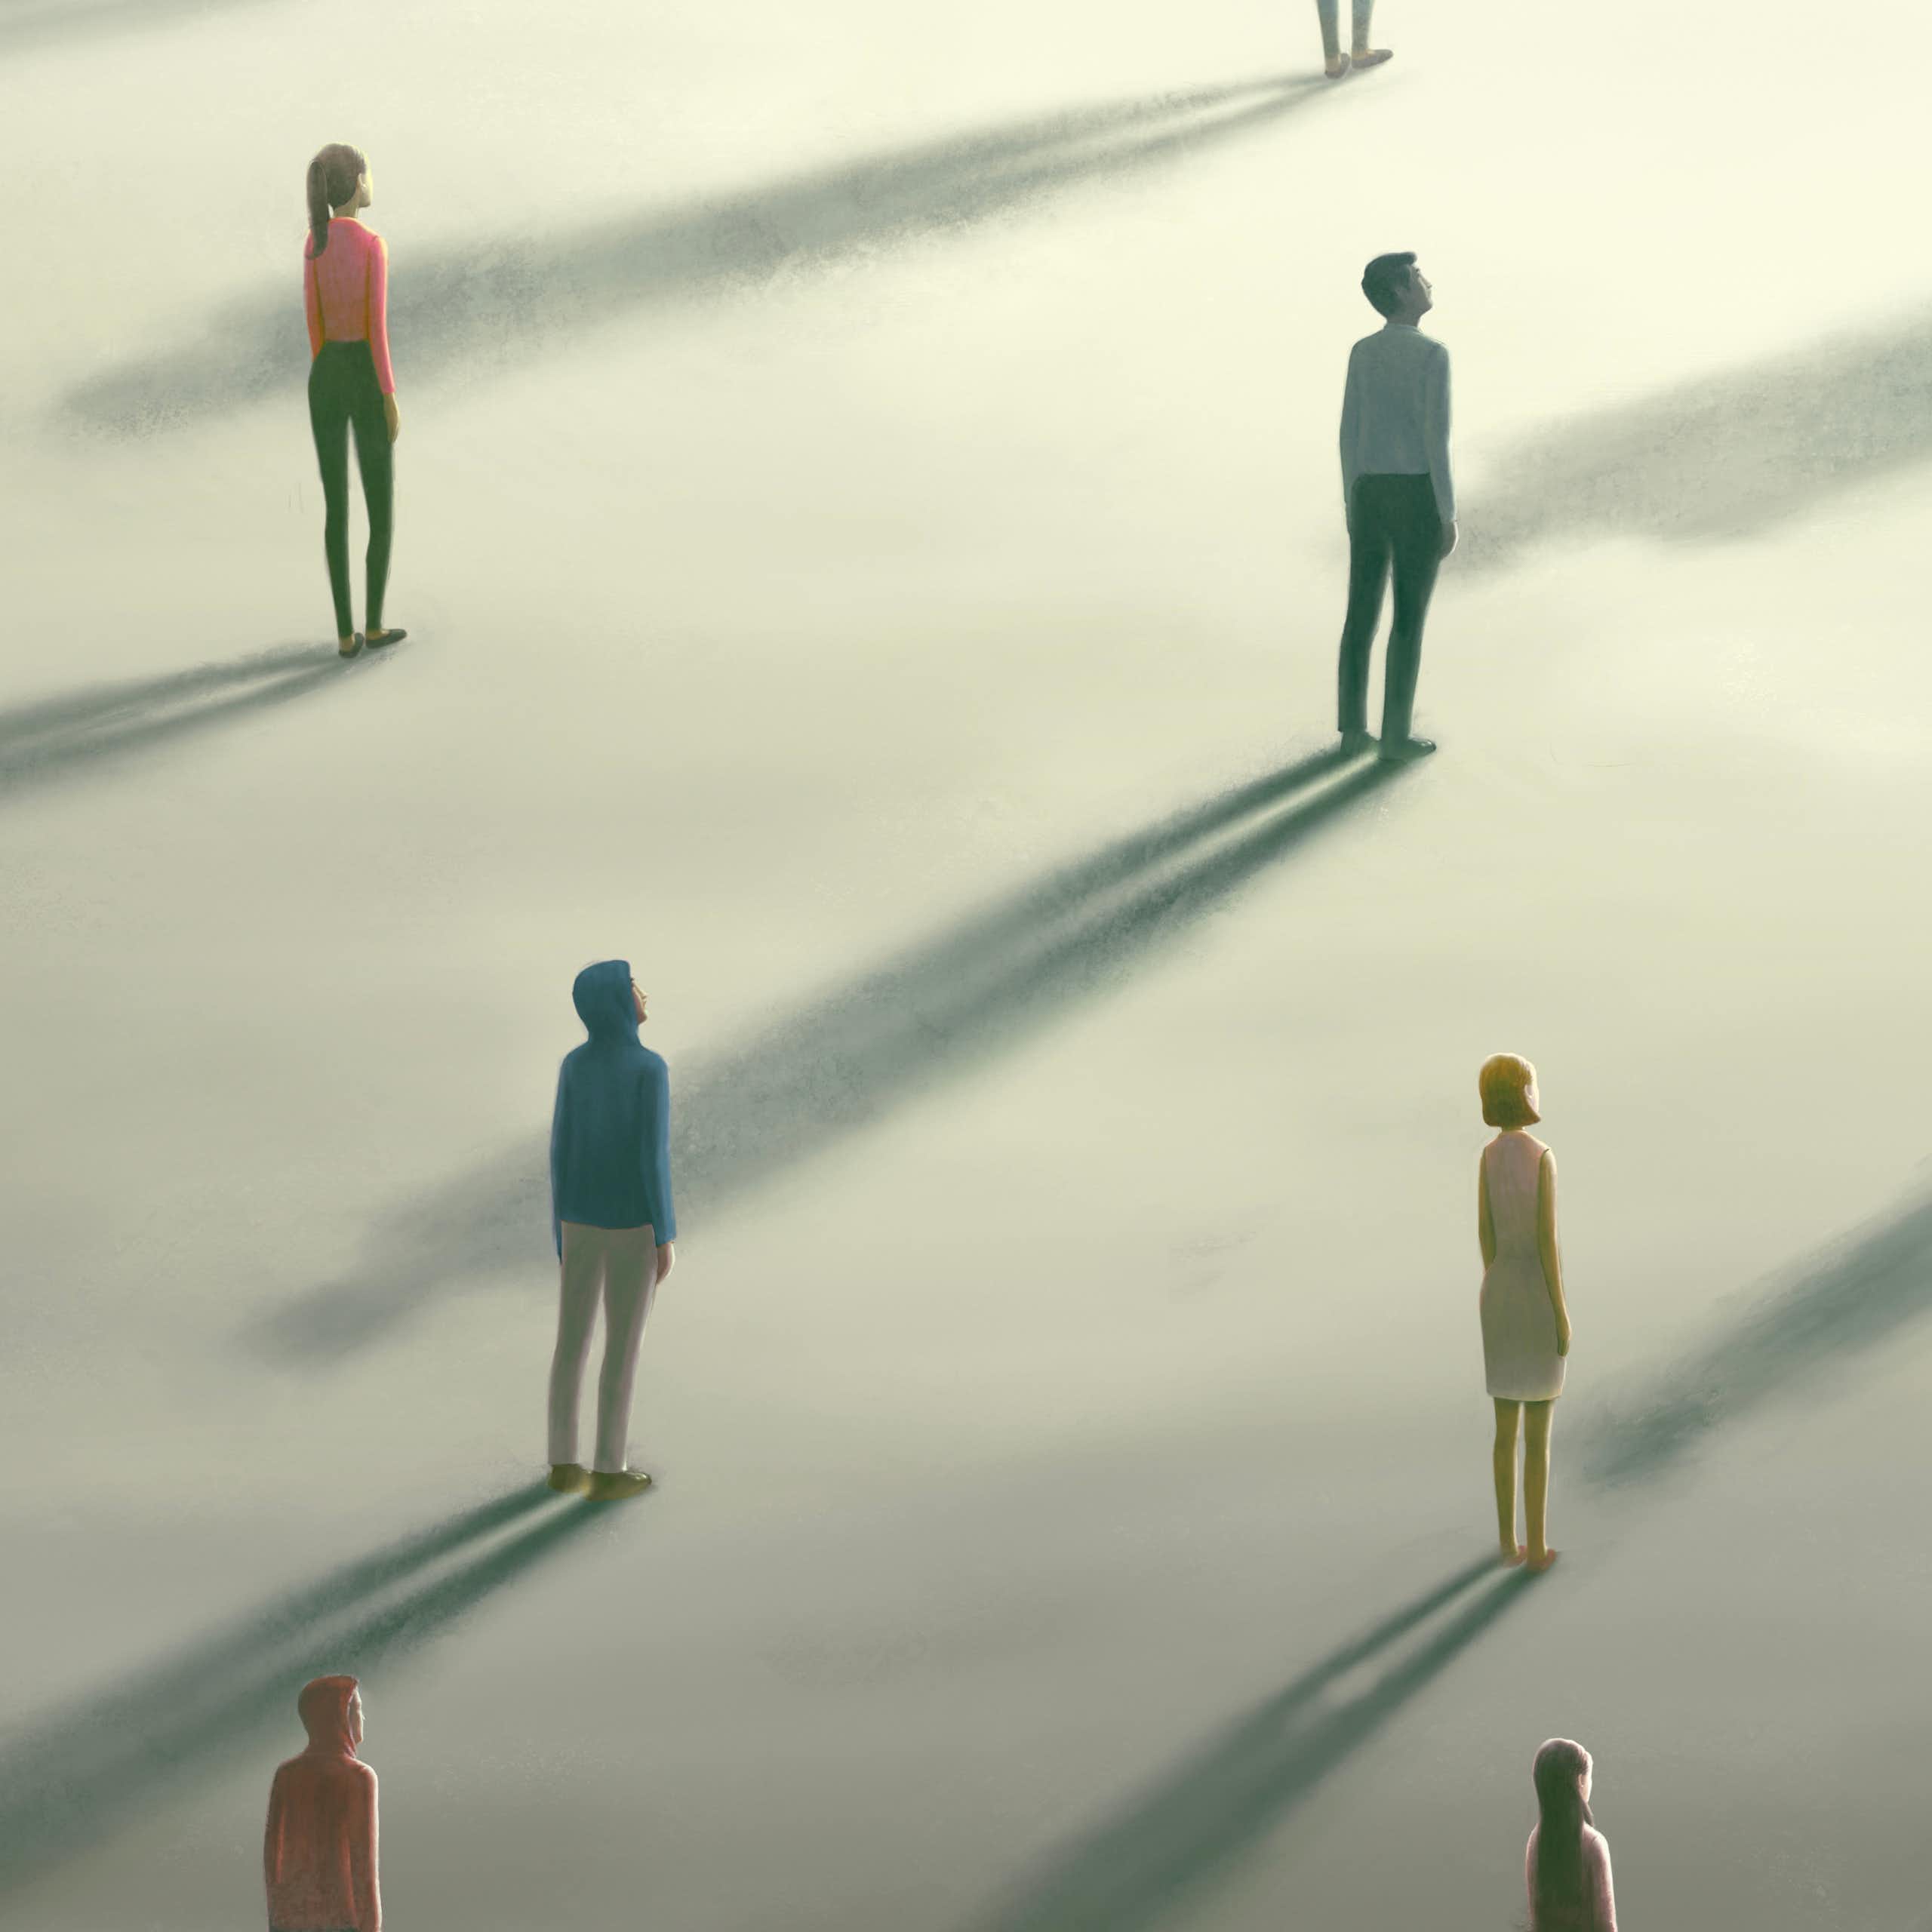 An illustration of a 'crowd' of lonely people